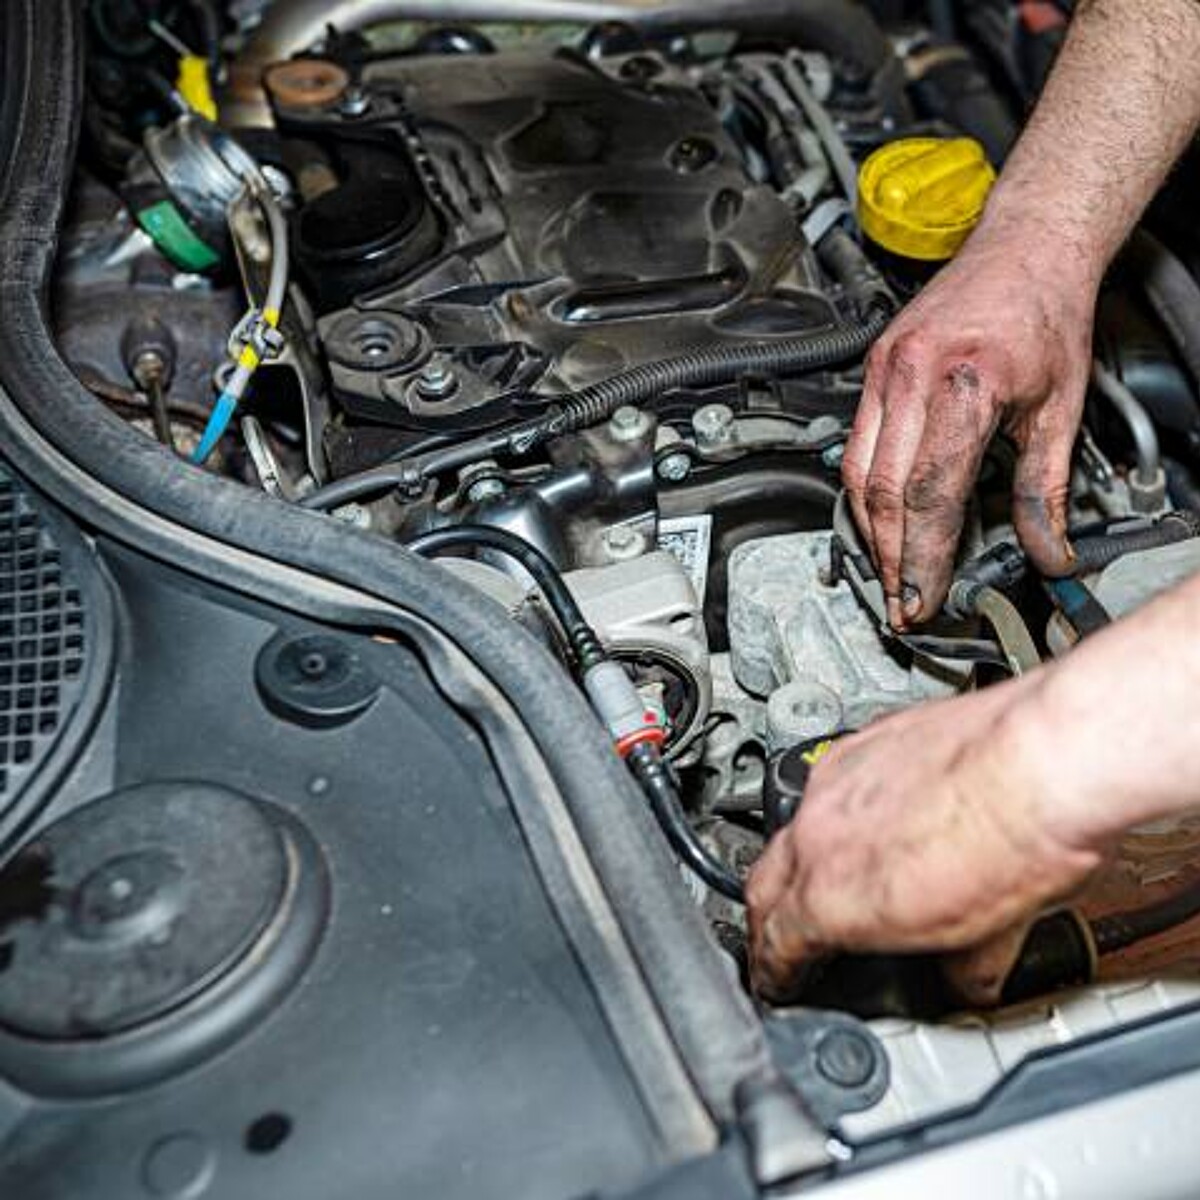 Fuel Pump Repair and Replacement Cost